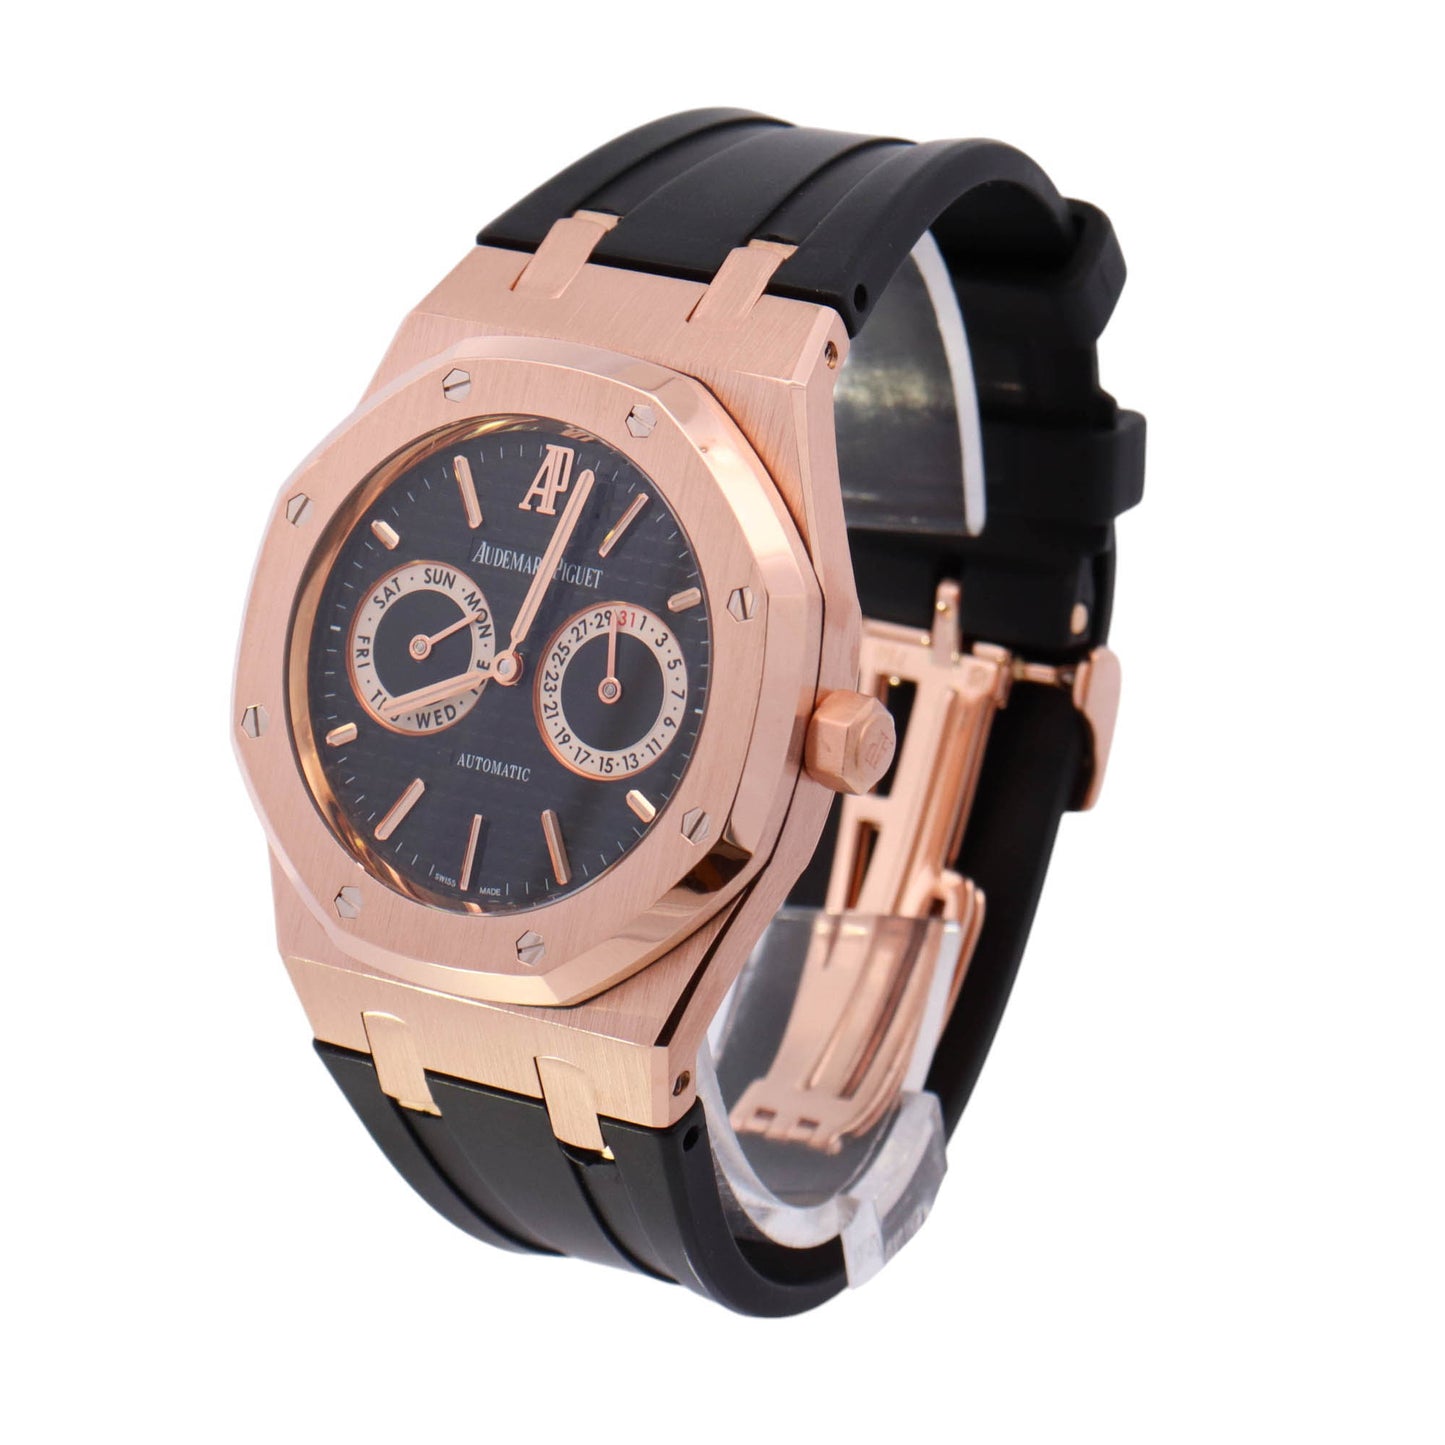 Audemars Piguet Royal Oak Day-Date "Owl" Rose Gold 39mm Black Stick Dial Watch Reference# 26330OR.OO.D088CR.01 - Happy Jewelers Fine Jewelry Lifetime Warranty